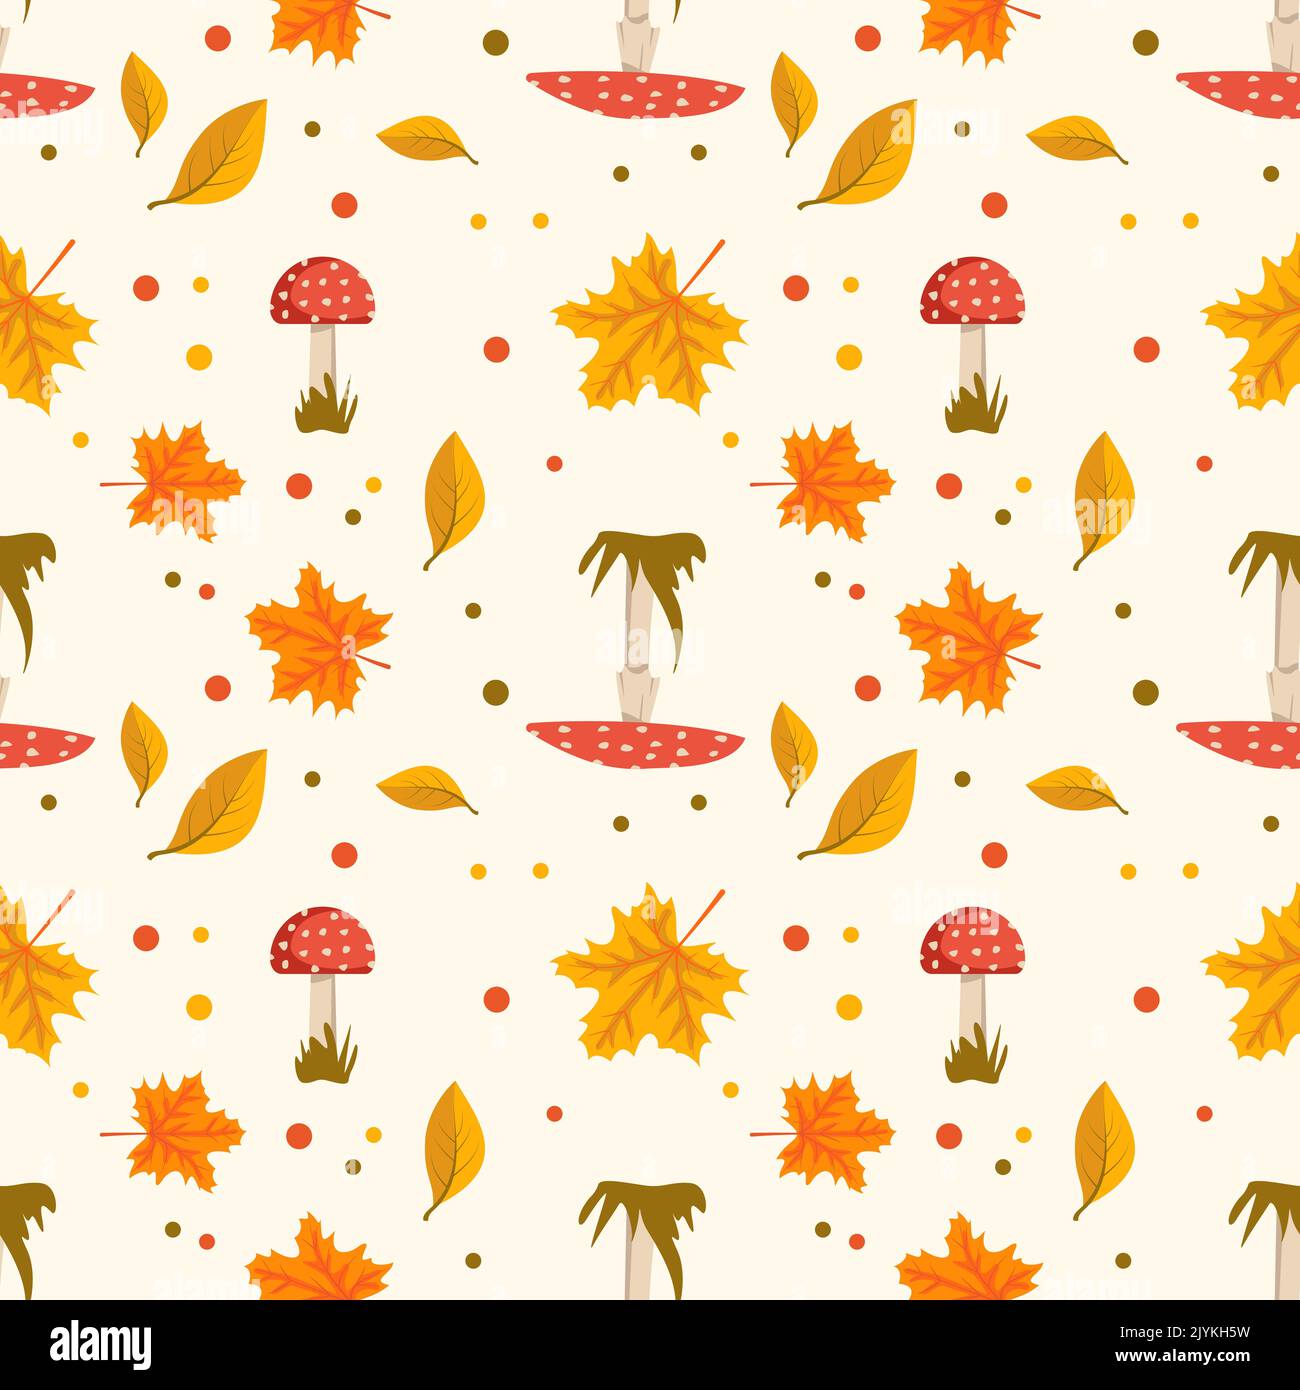 Autumn seamless pattern with orange maple, rowan leaves and fly agaric mushrooms with red caps and white dots. Bright fall print. Decoration for holiday. Vector flat illustration Stock Vector